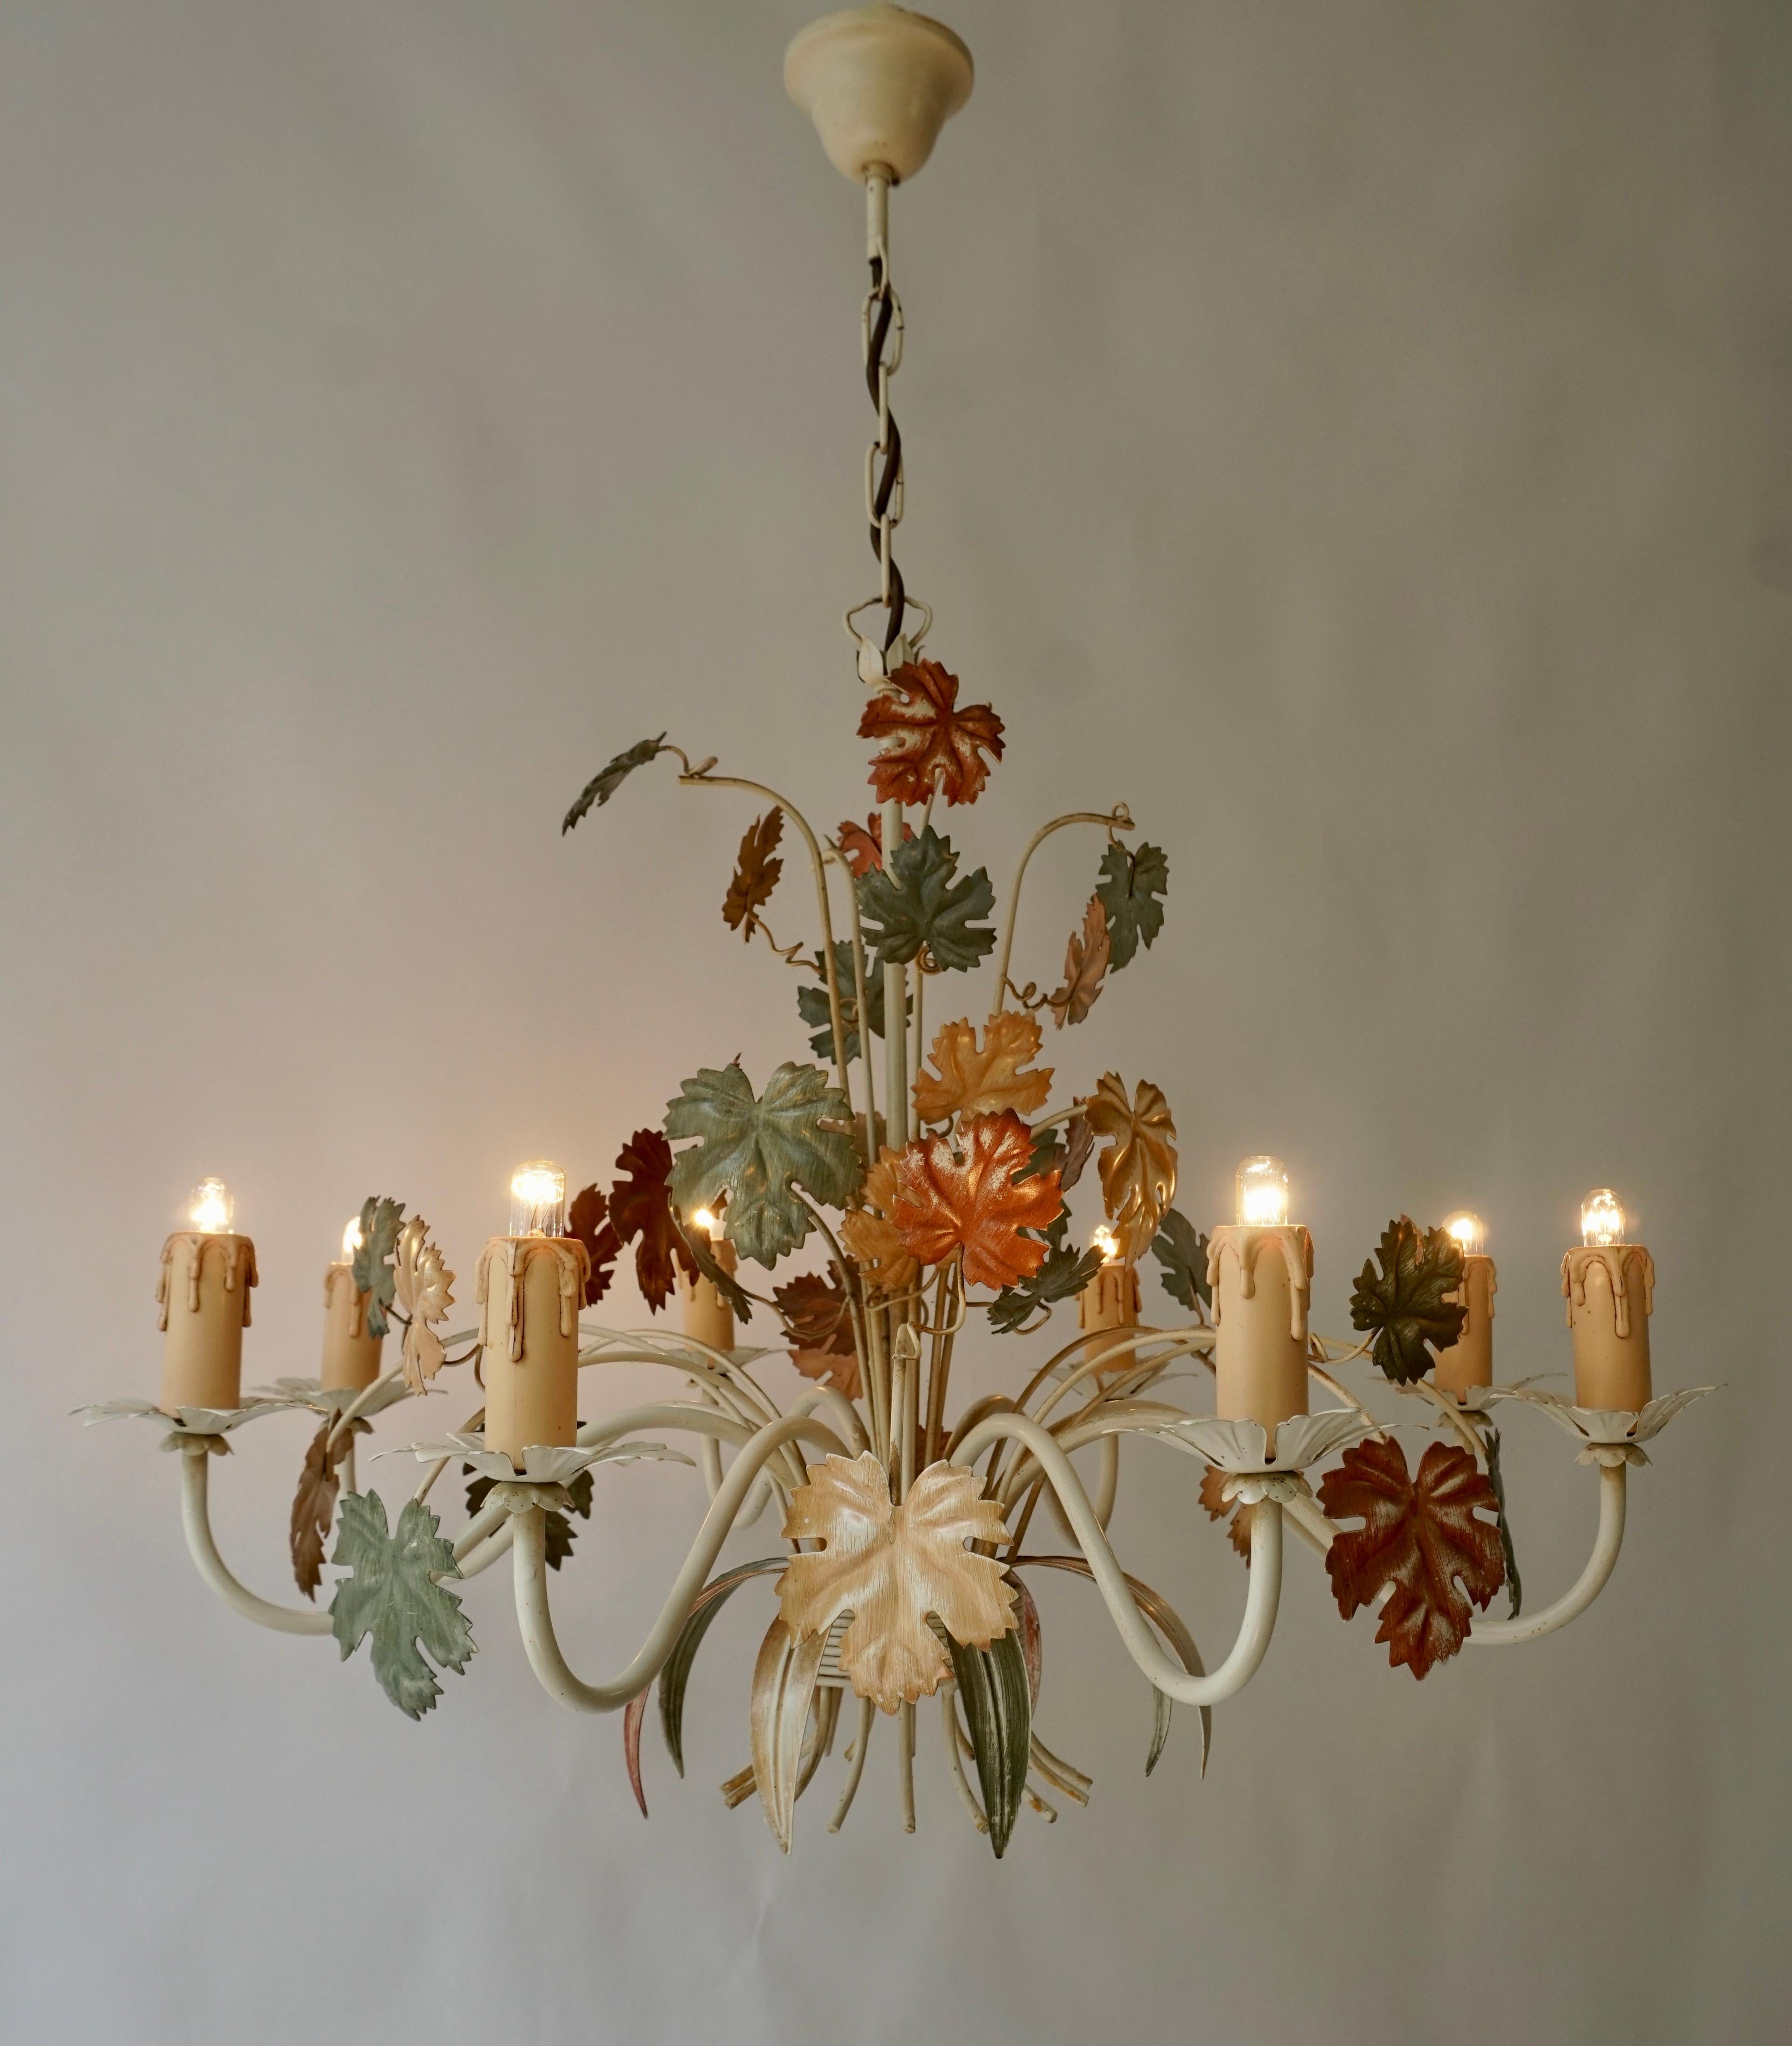 Three Hollywood Regency tole floral chandelier with leaves . Original ceiling cap. Made in Italy. Eight and five arms. 

We have two small and one large chandelier available.
The dimensions of the two small are:diameter 19.6